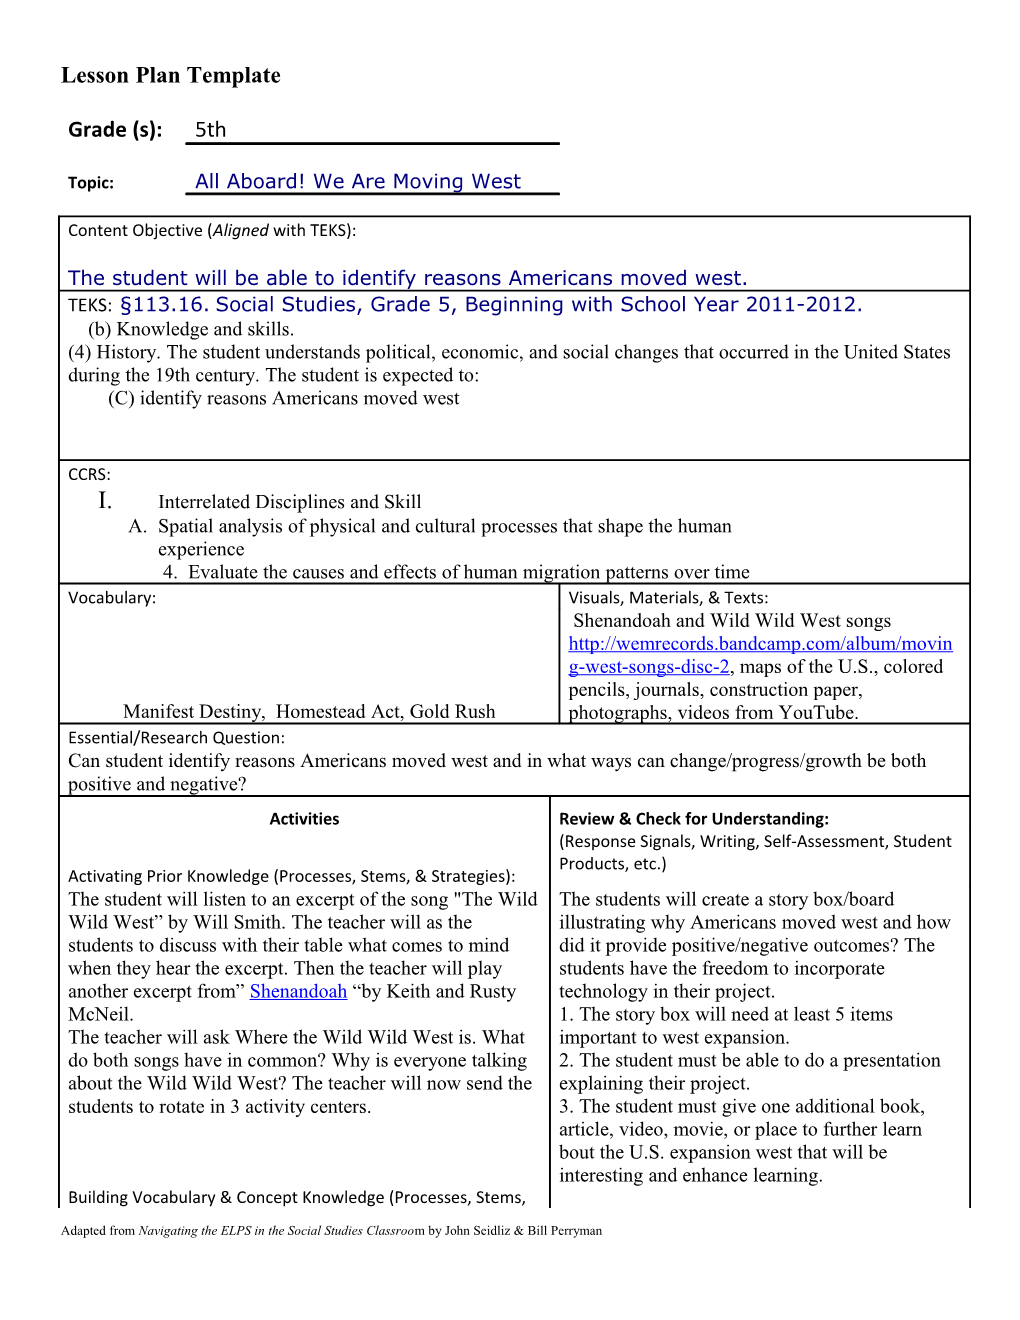 Lesson Plan Template s10